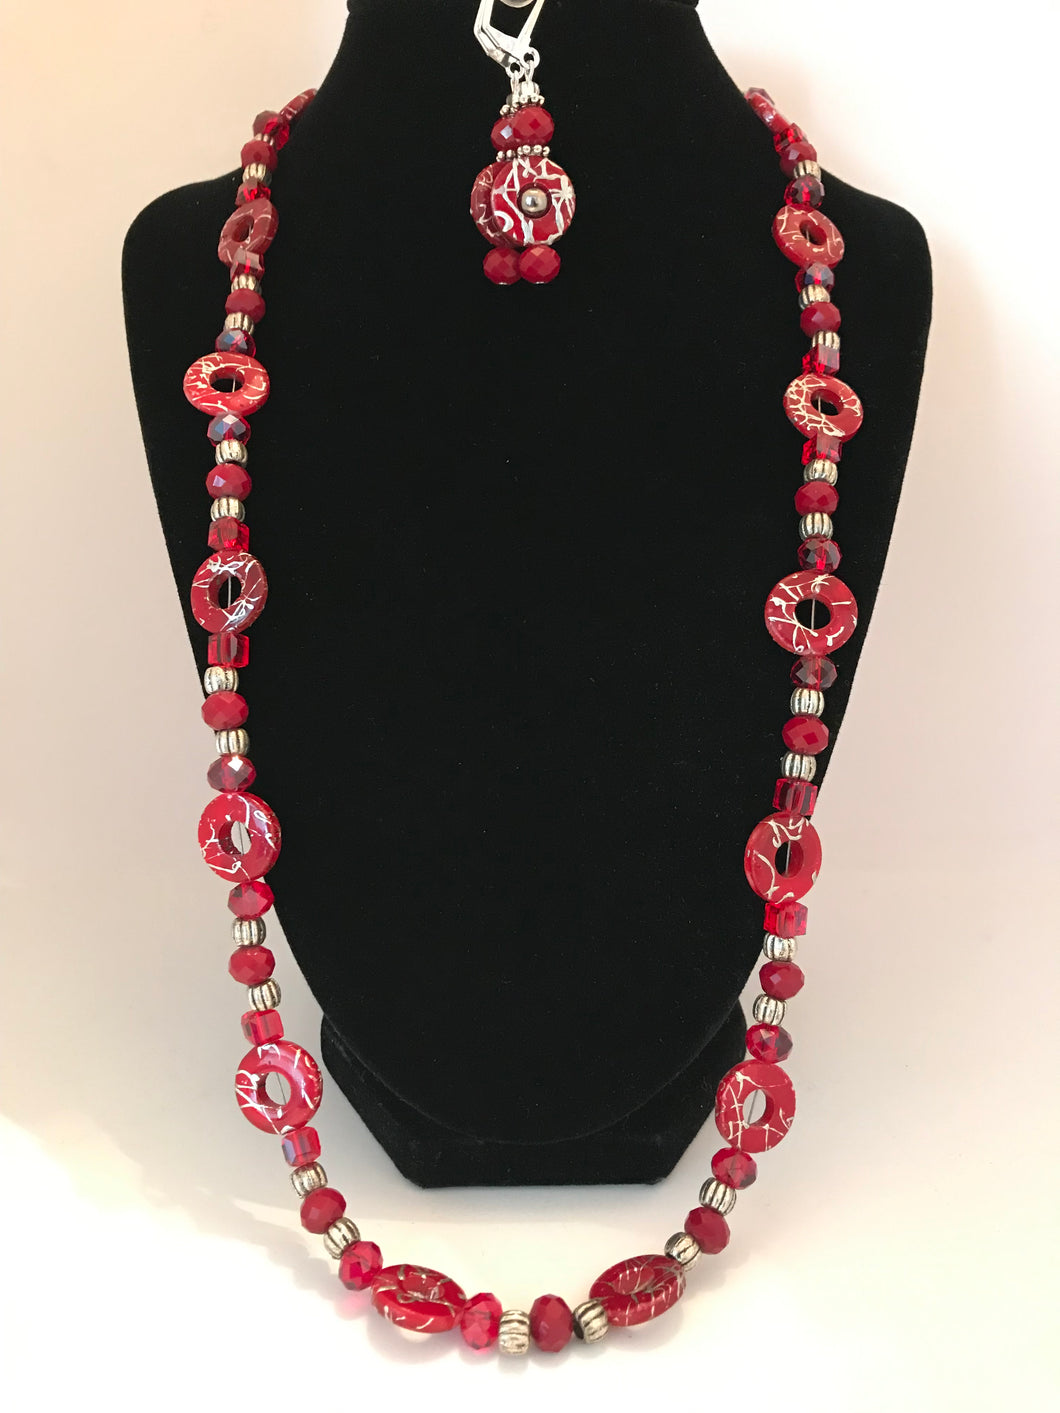 Red necklace with novelty round beads and matching earrings